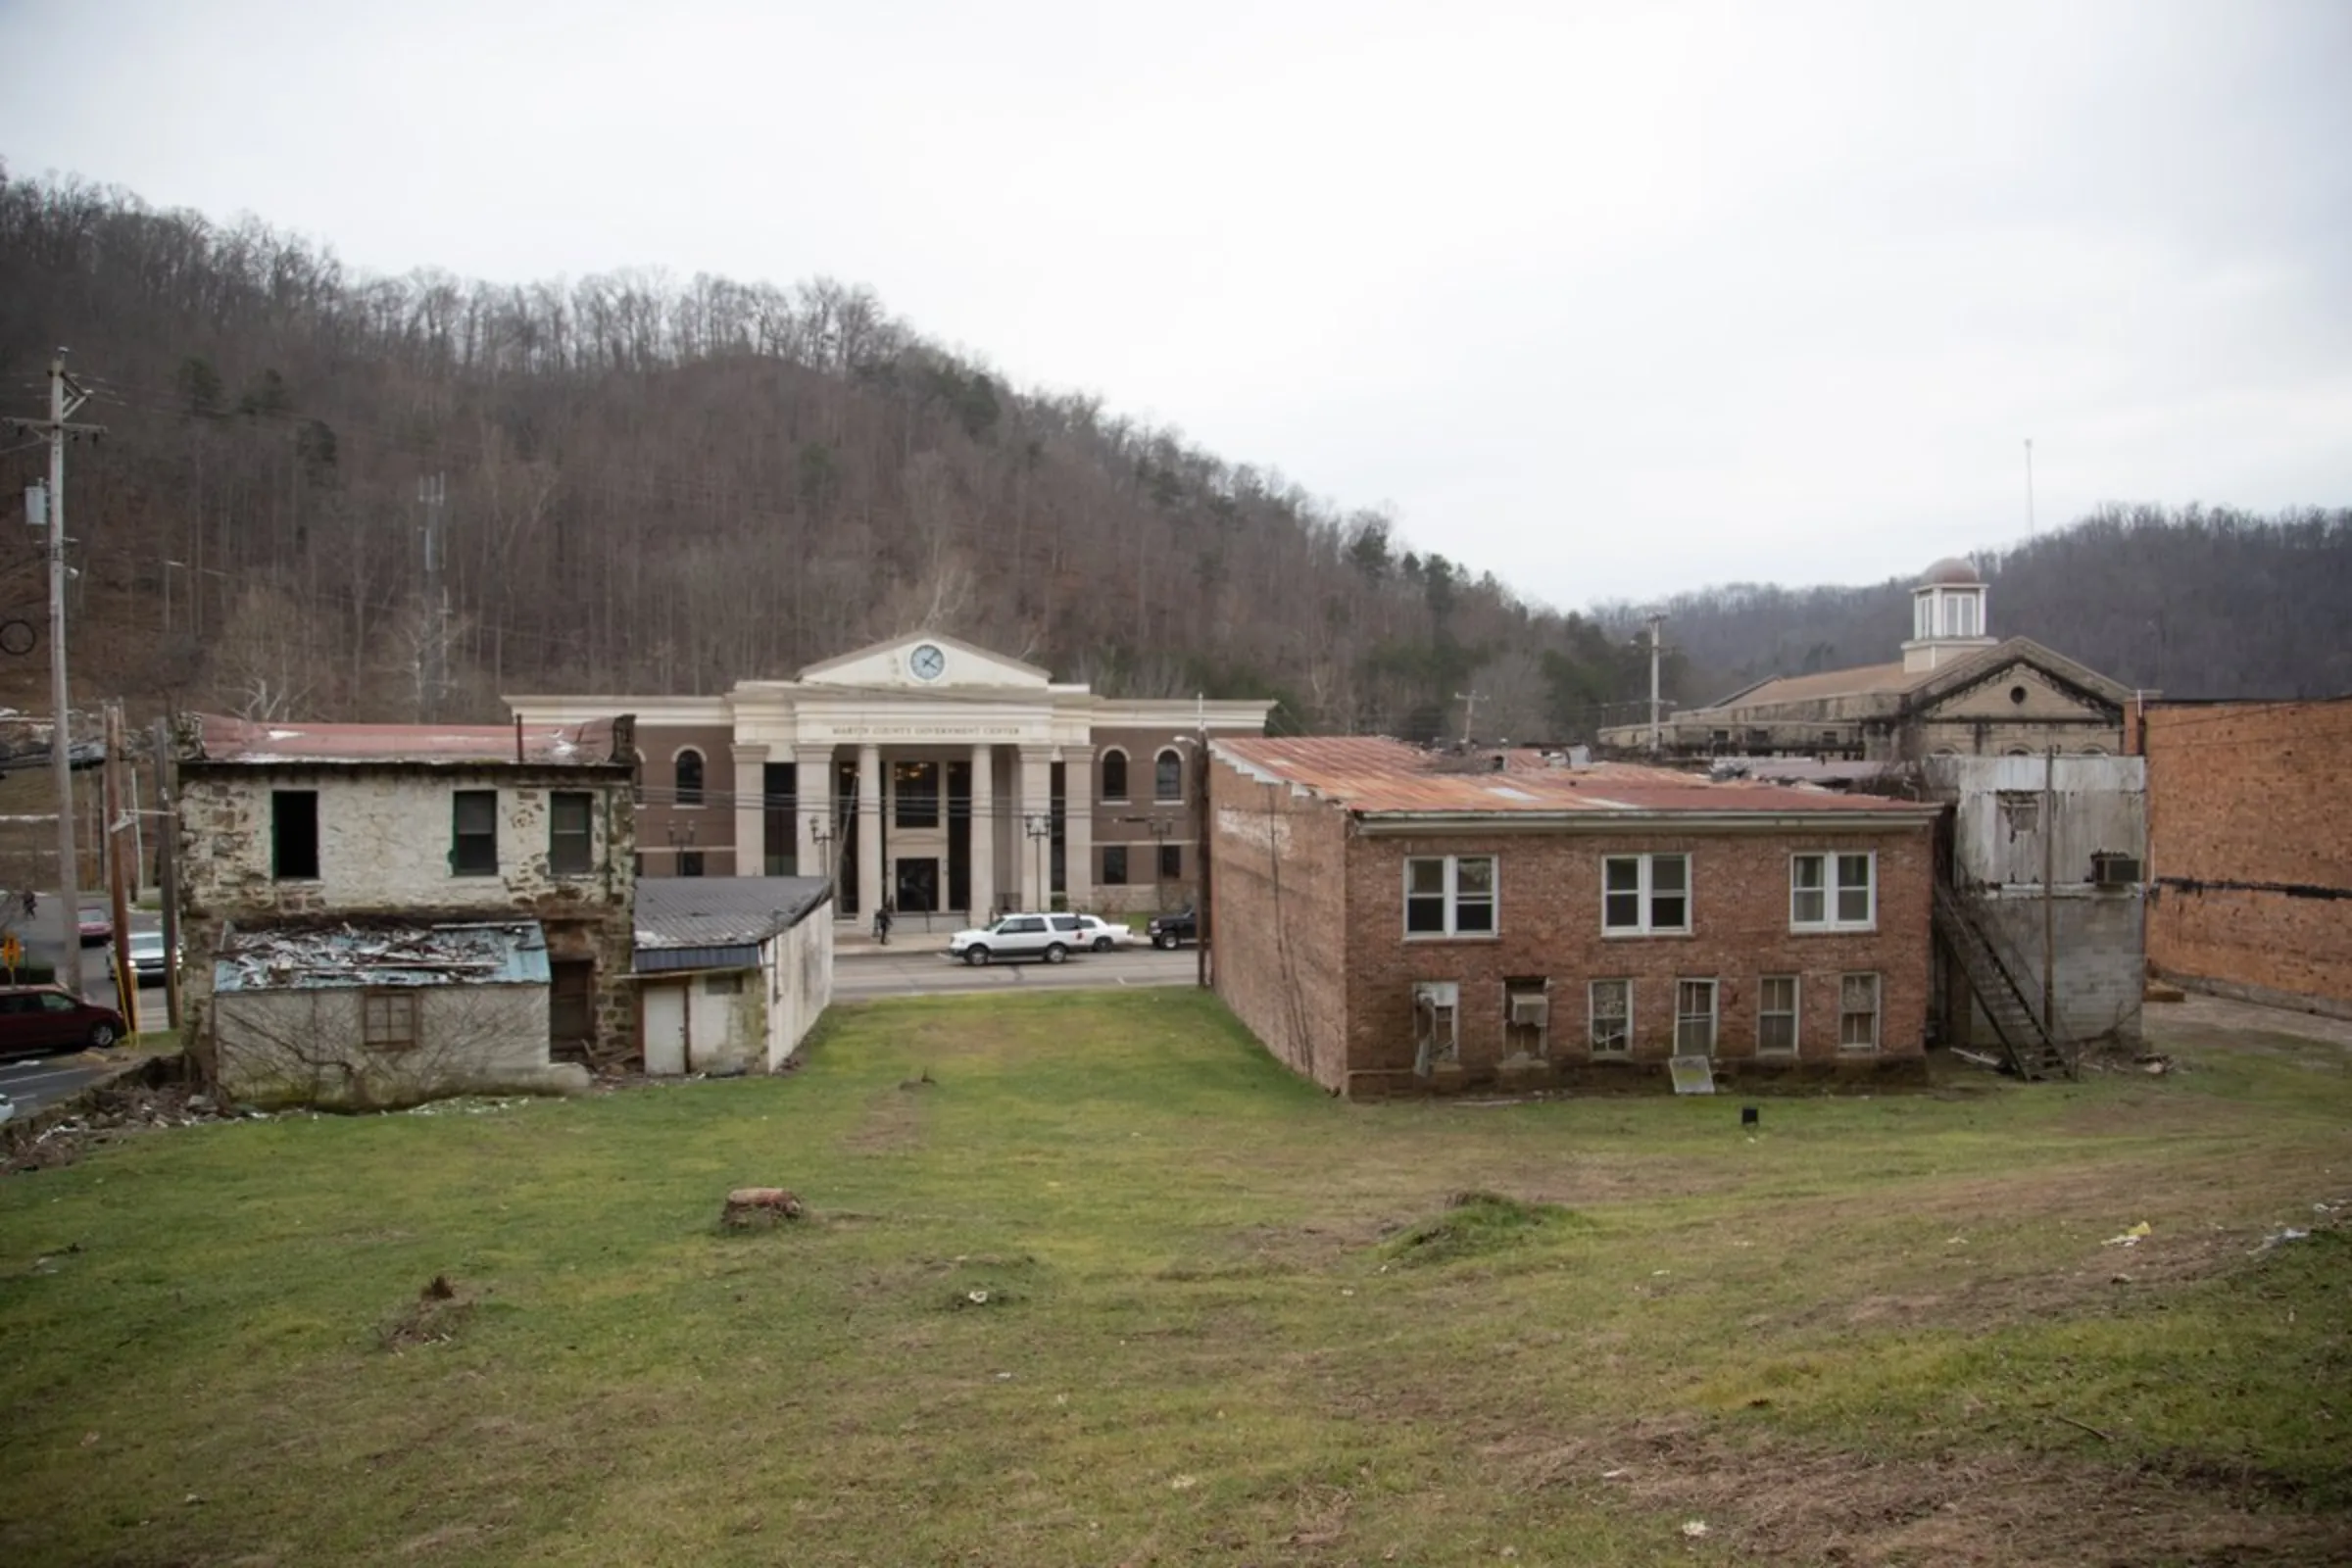 The Martin County government center stands between dilapidated buildings in downtown Inez, Kentucky, January 25, 2022. Thomson Reuters Foundation/Amira Karaoud